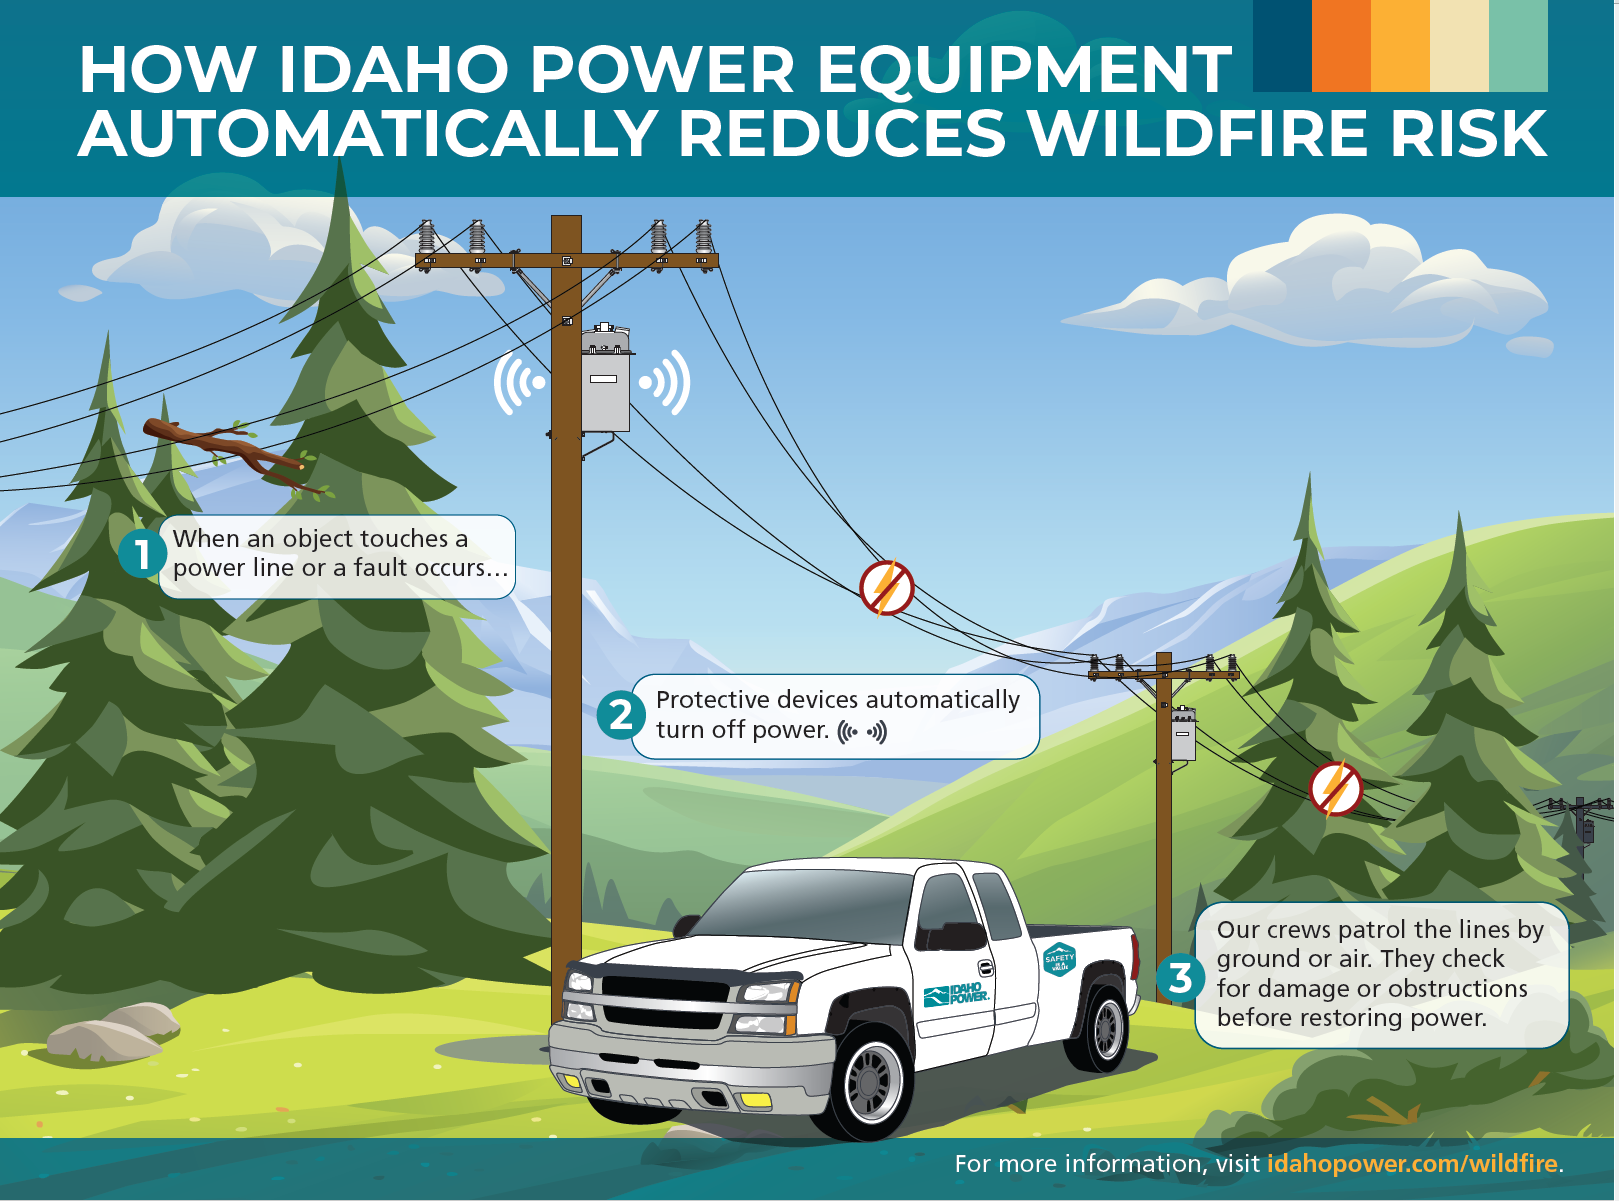 How Idaho Power equipment automatically reduces wildfire risk: 1) When an object touches a power line or a fault occurs, 2) Protective devices automatically turn off power. 3) Our crews patrol the lines by ground or air. They check for damage or obstructions before restoring power.